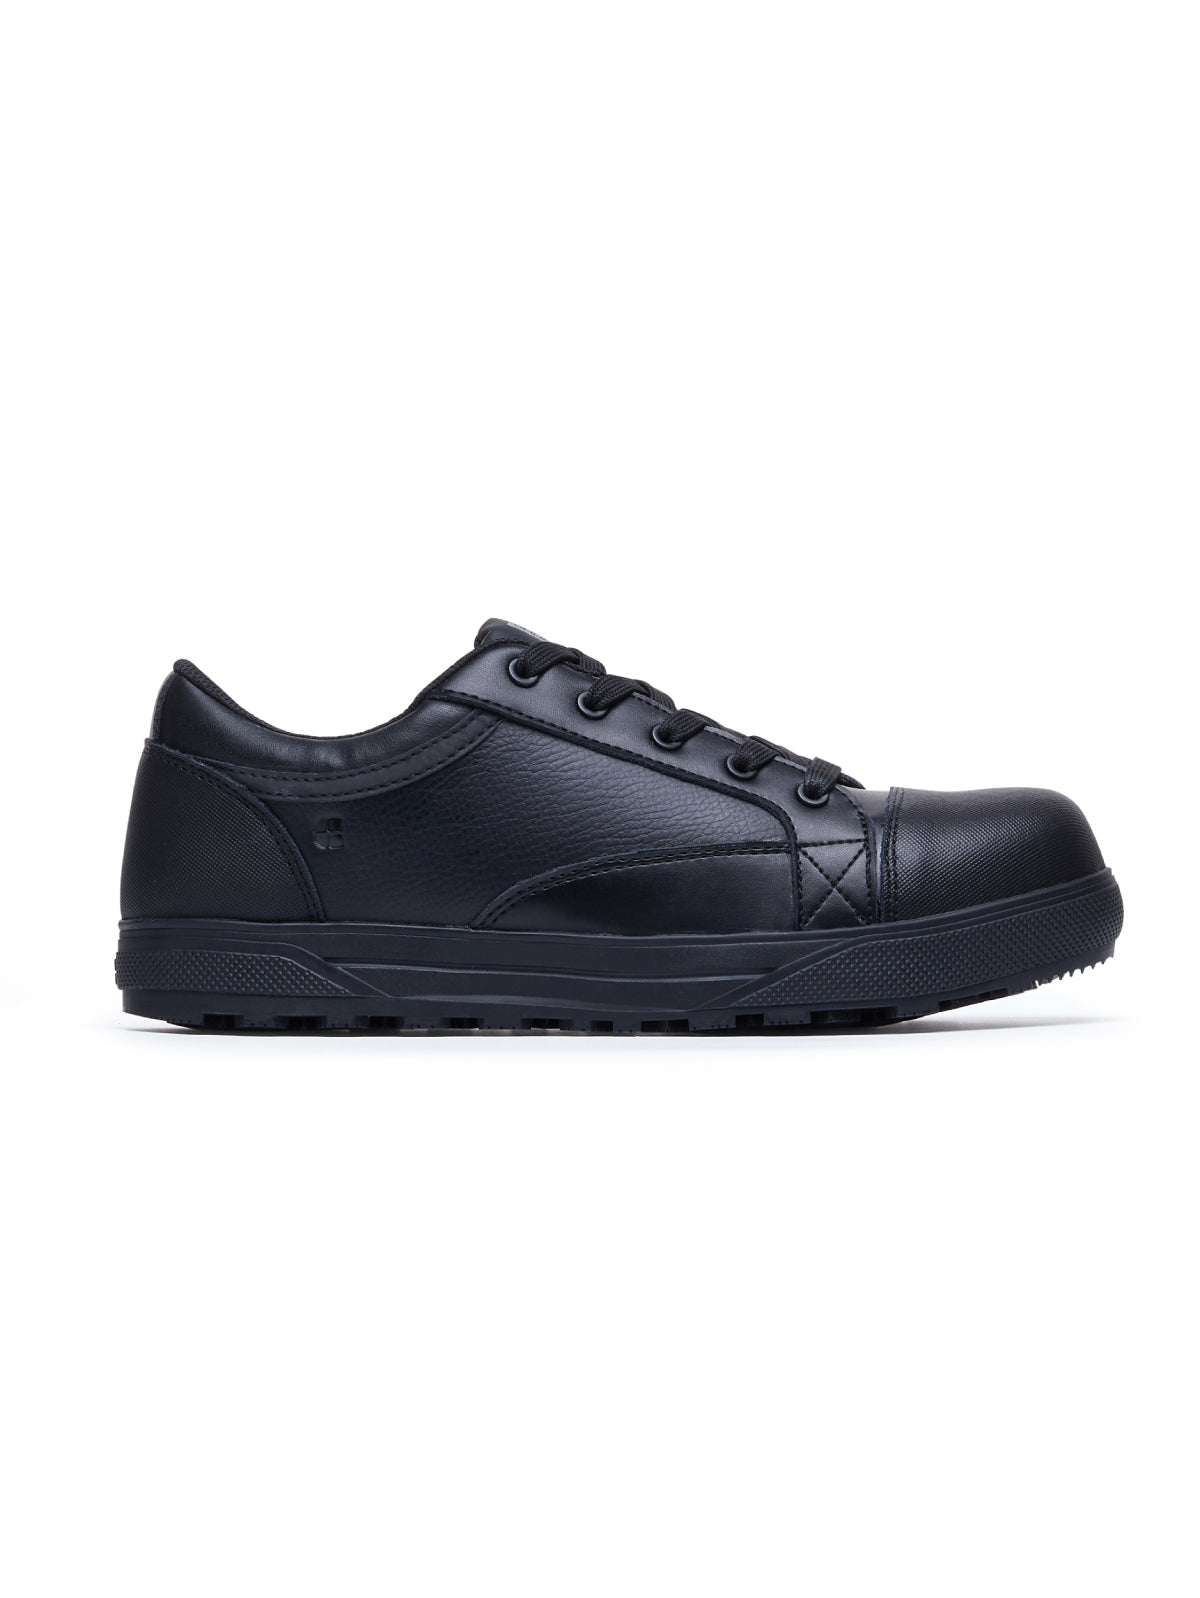 Unisex Safety Shoe Fergus Black (S3) by  Shoes For Crews.